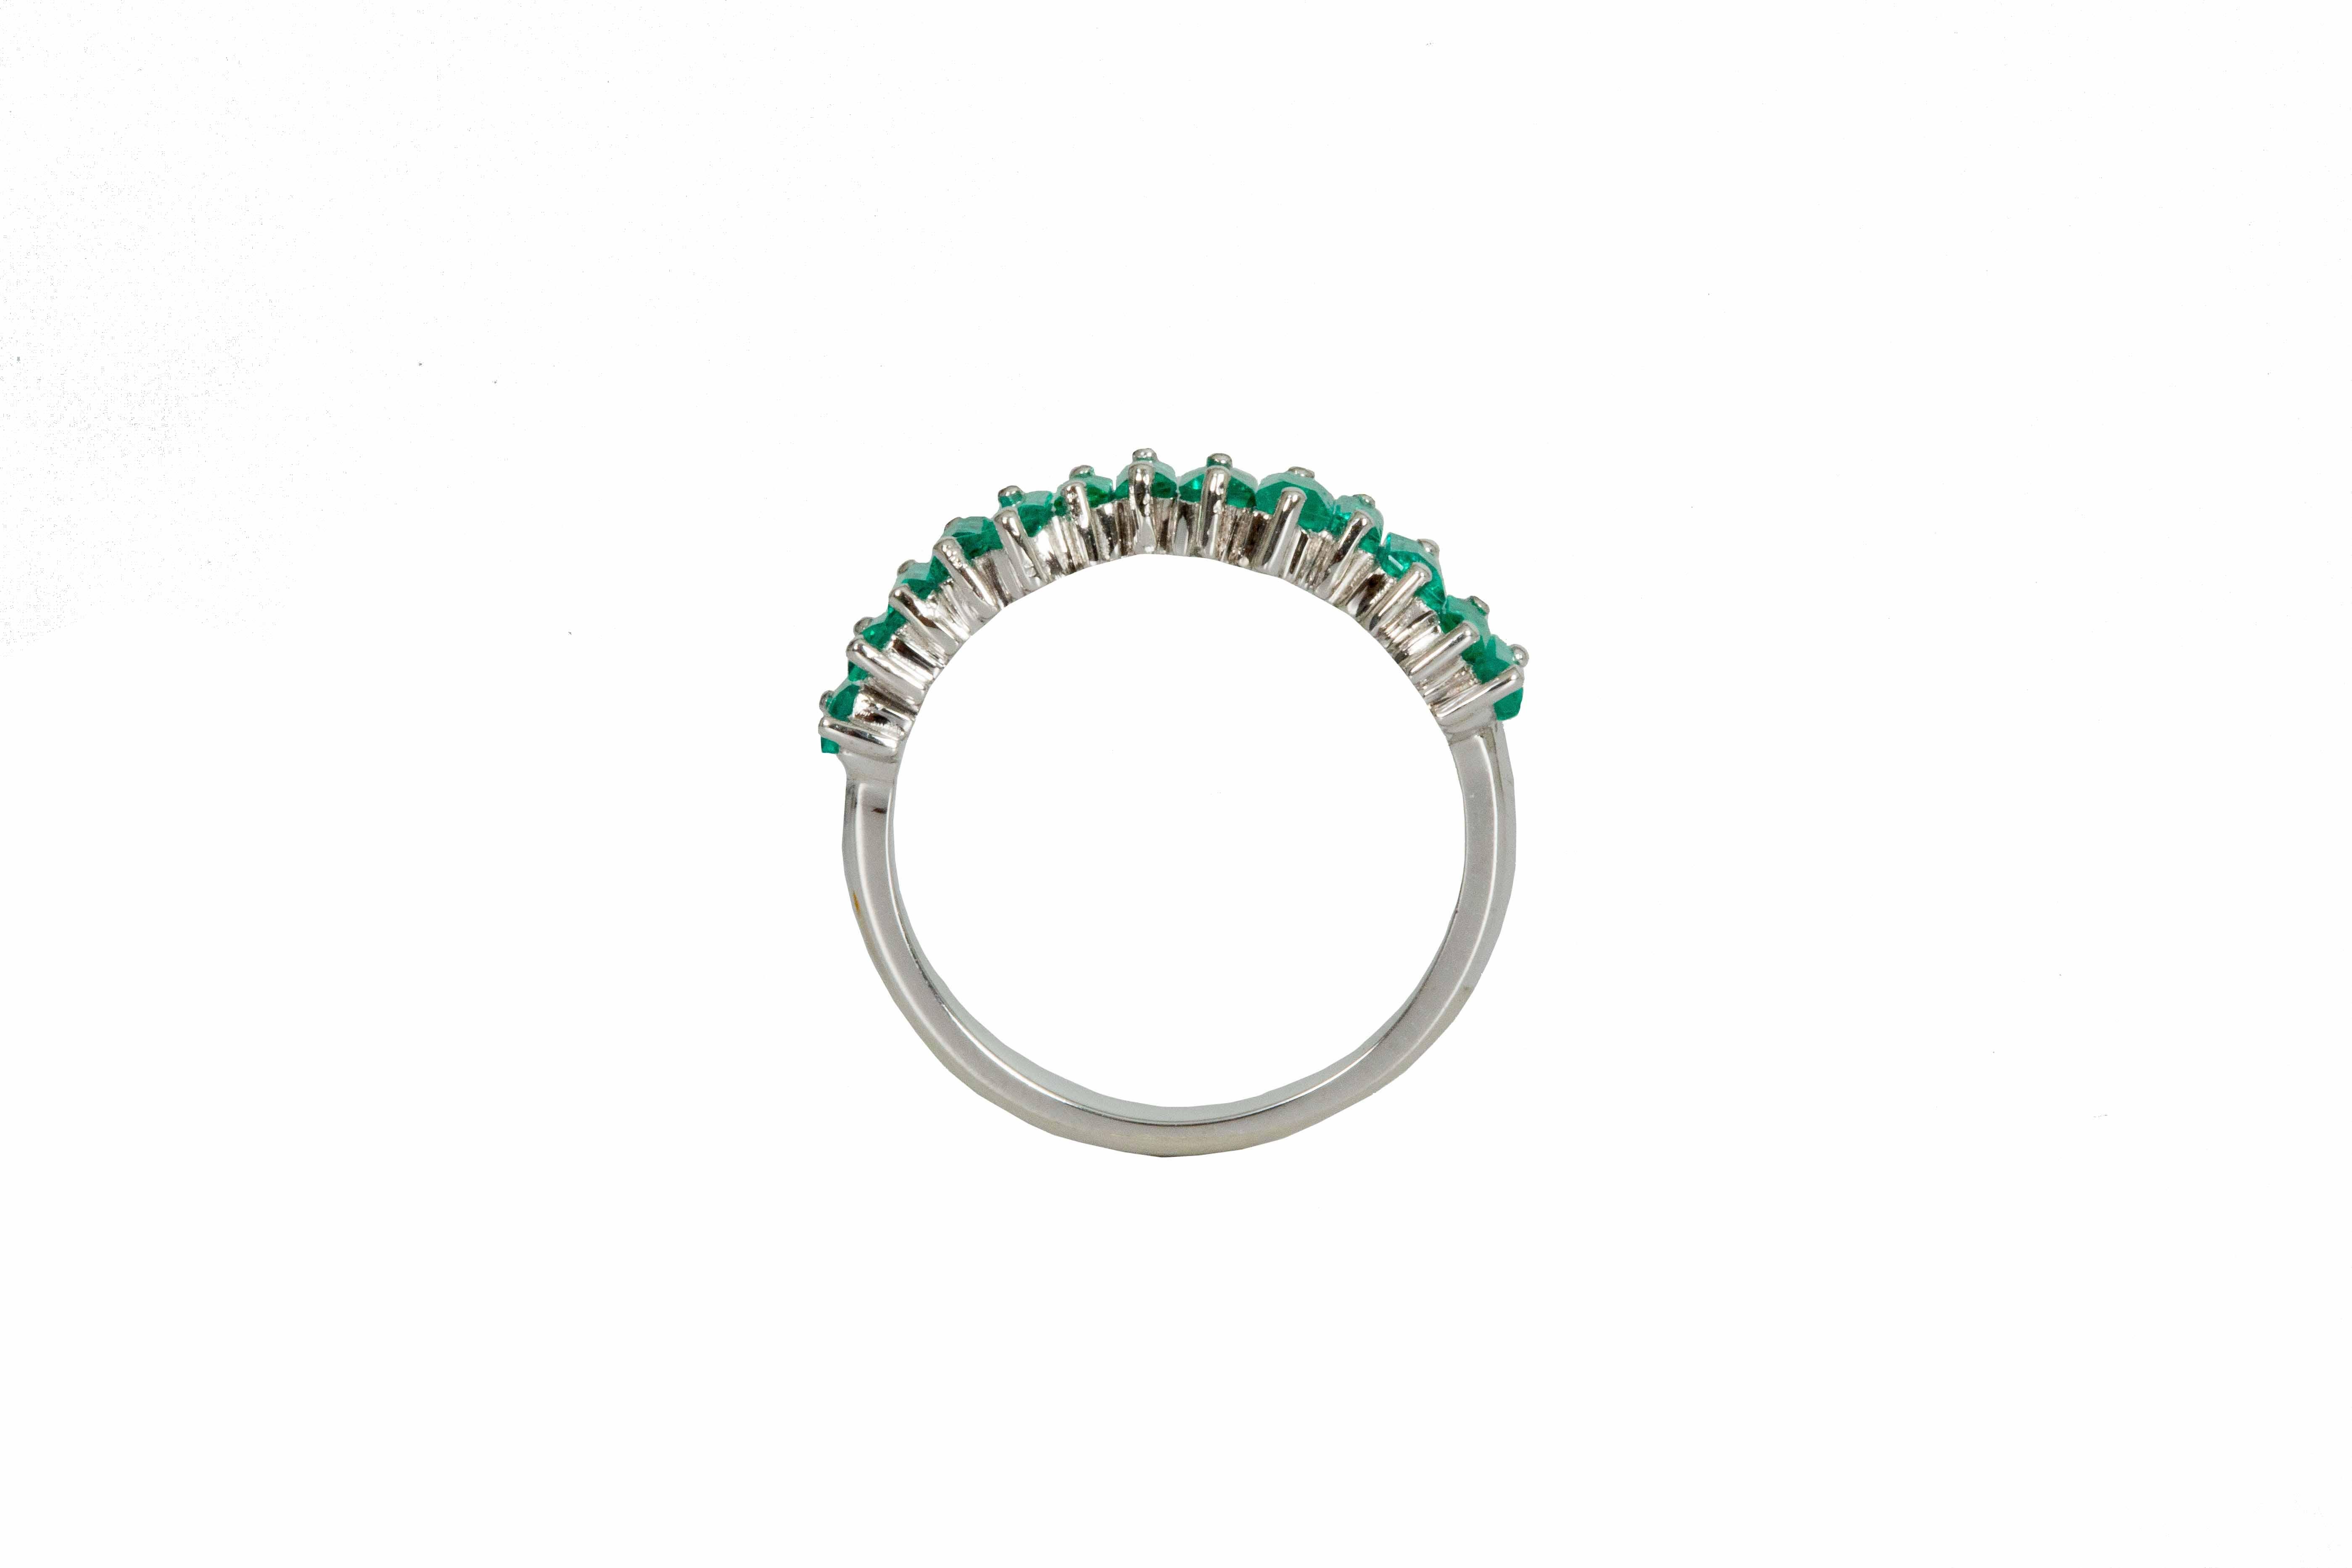 18 carat white gold band with 14 baguette cut Colombian emeralds weighing 1.40 carats total. Our Emeralds are hand selected by our team of experts and carefully set unevenly to create a fascinating composition. A twist on tradition this 